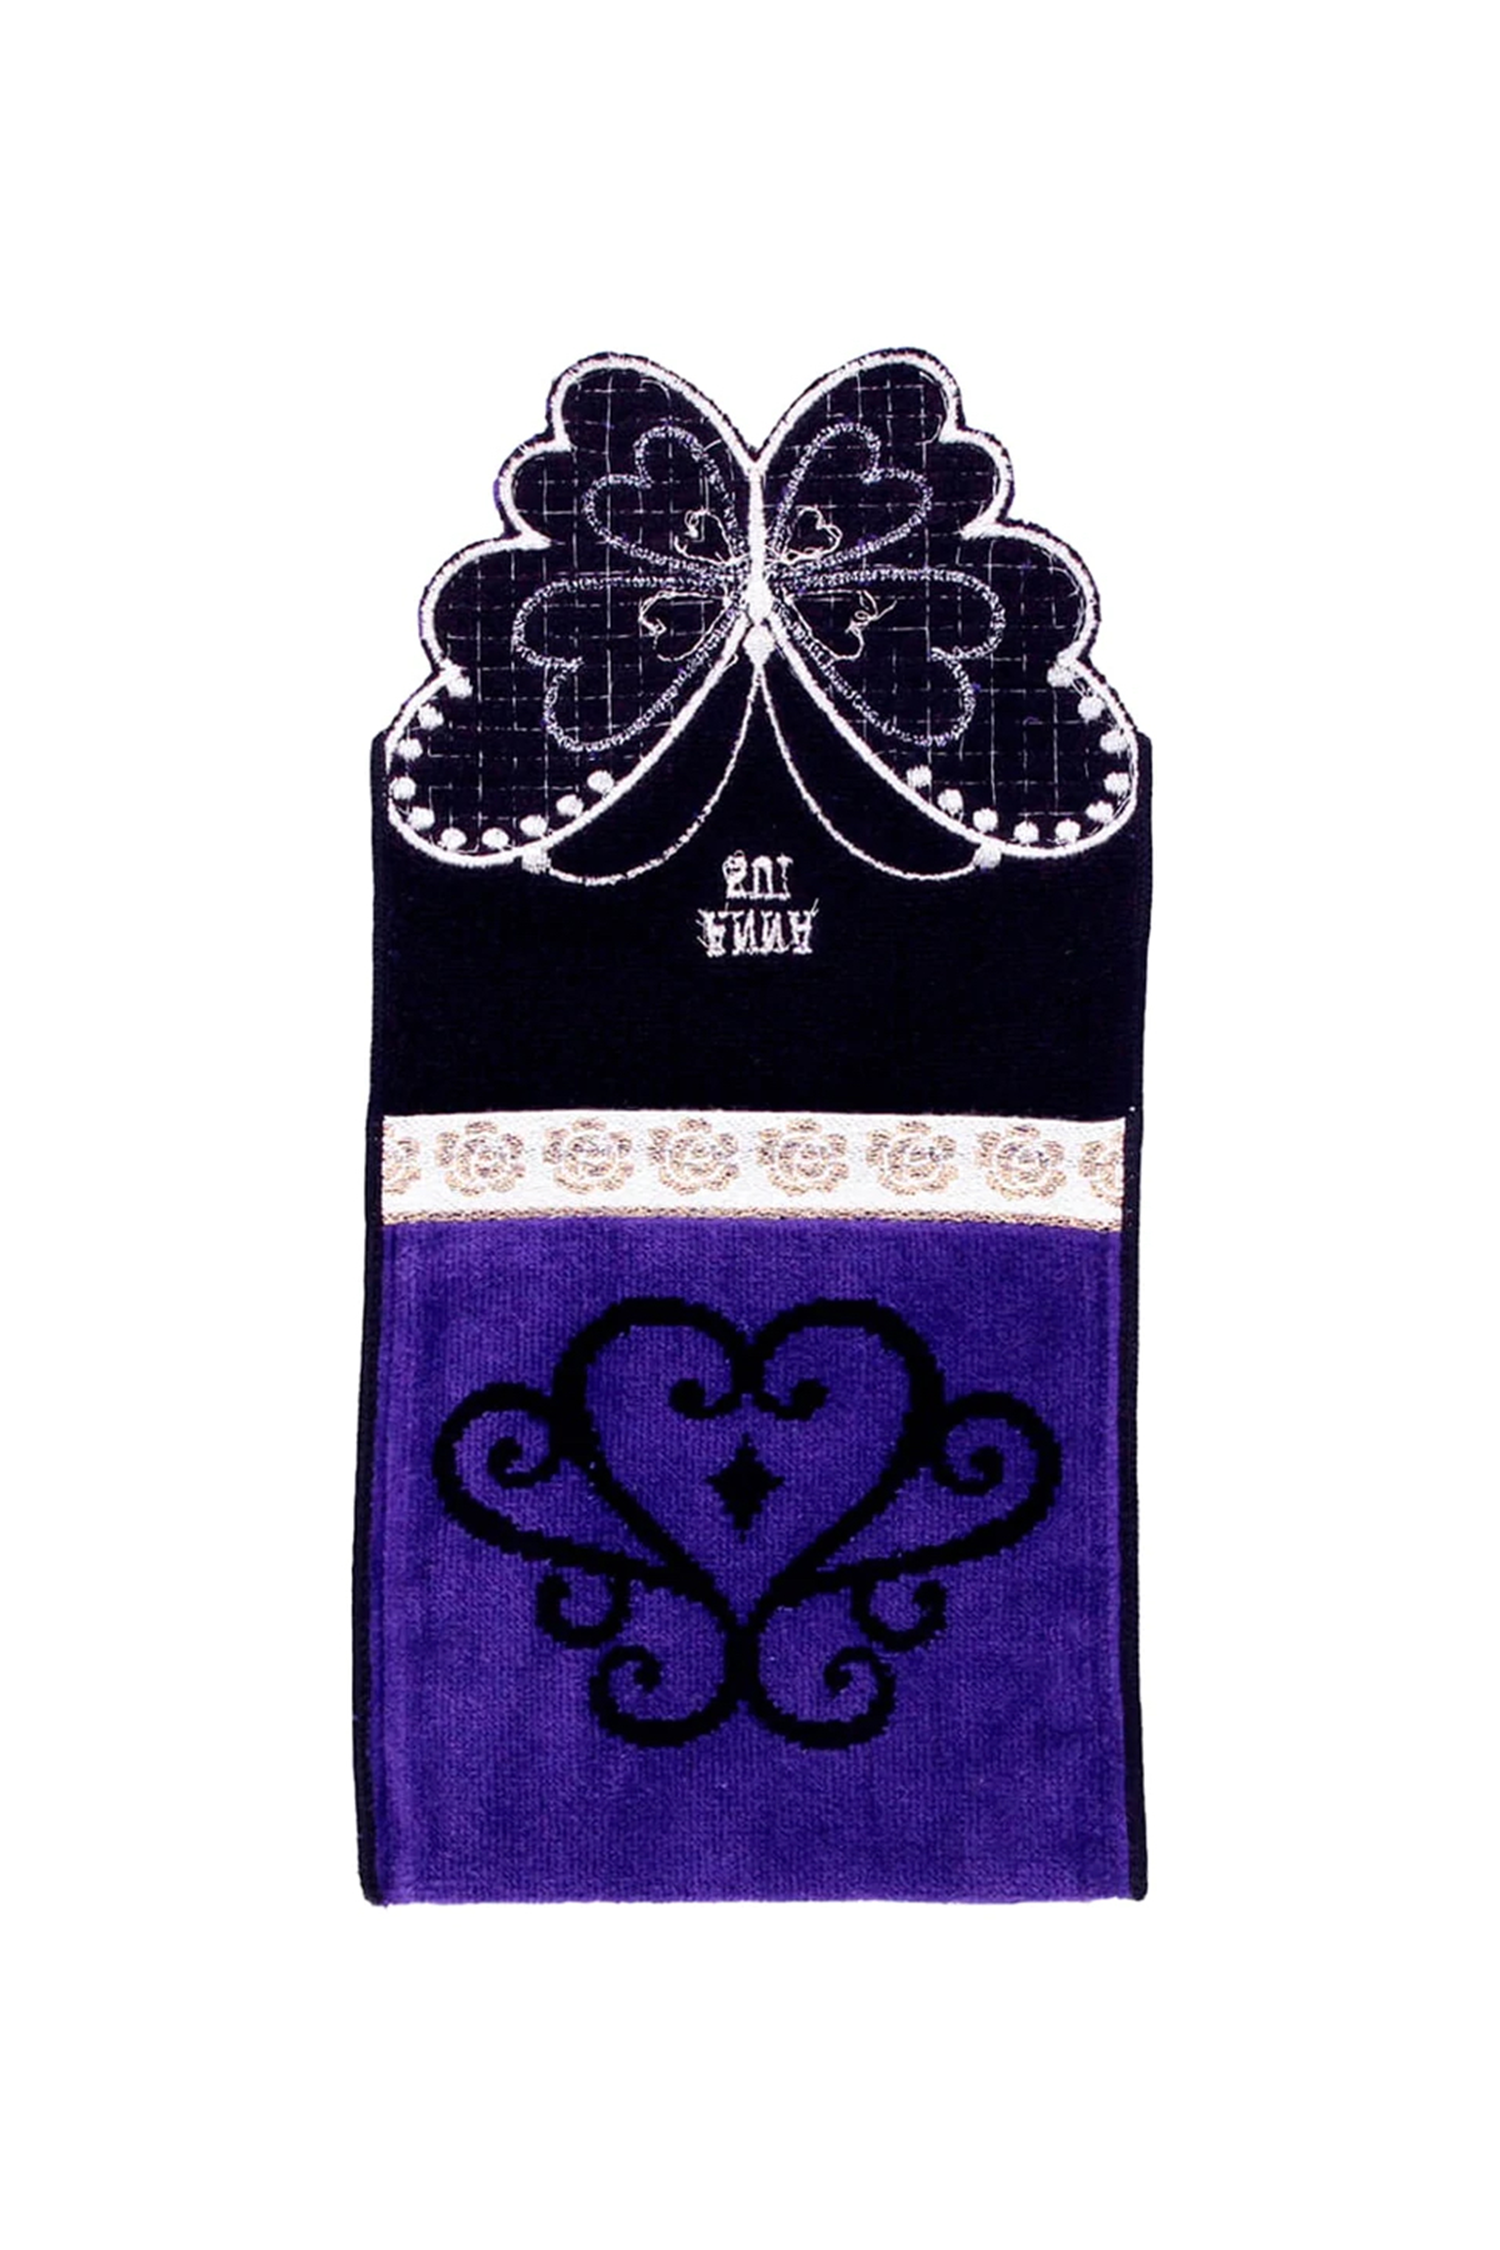 Other Side Purple Pocket Washcloth, cut-out butterfly, Anna Sui label, black floral design in center